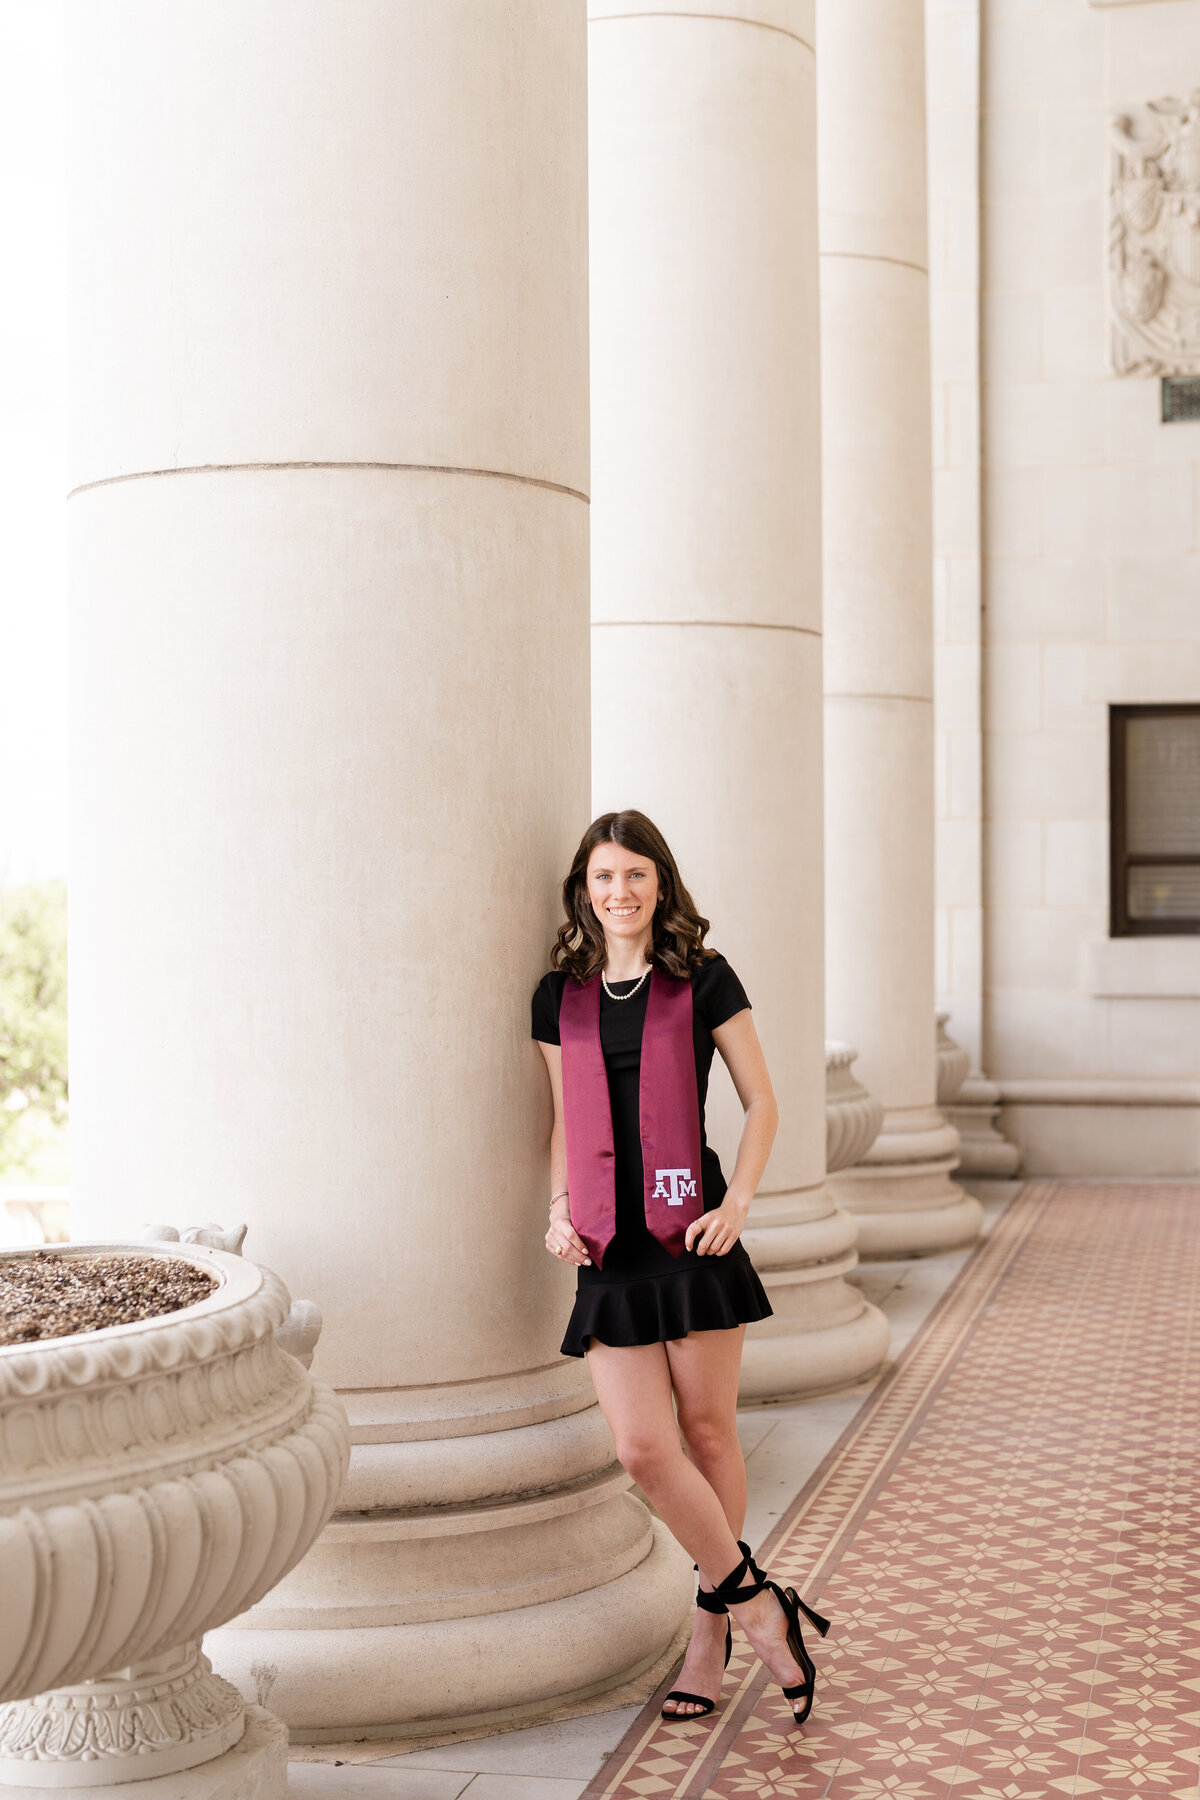 Texas A&M senior girl holding stole and leaning against column while wearing black dress and maroon stole at Administration Building